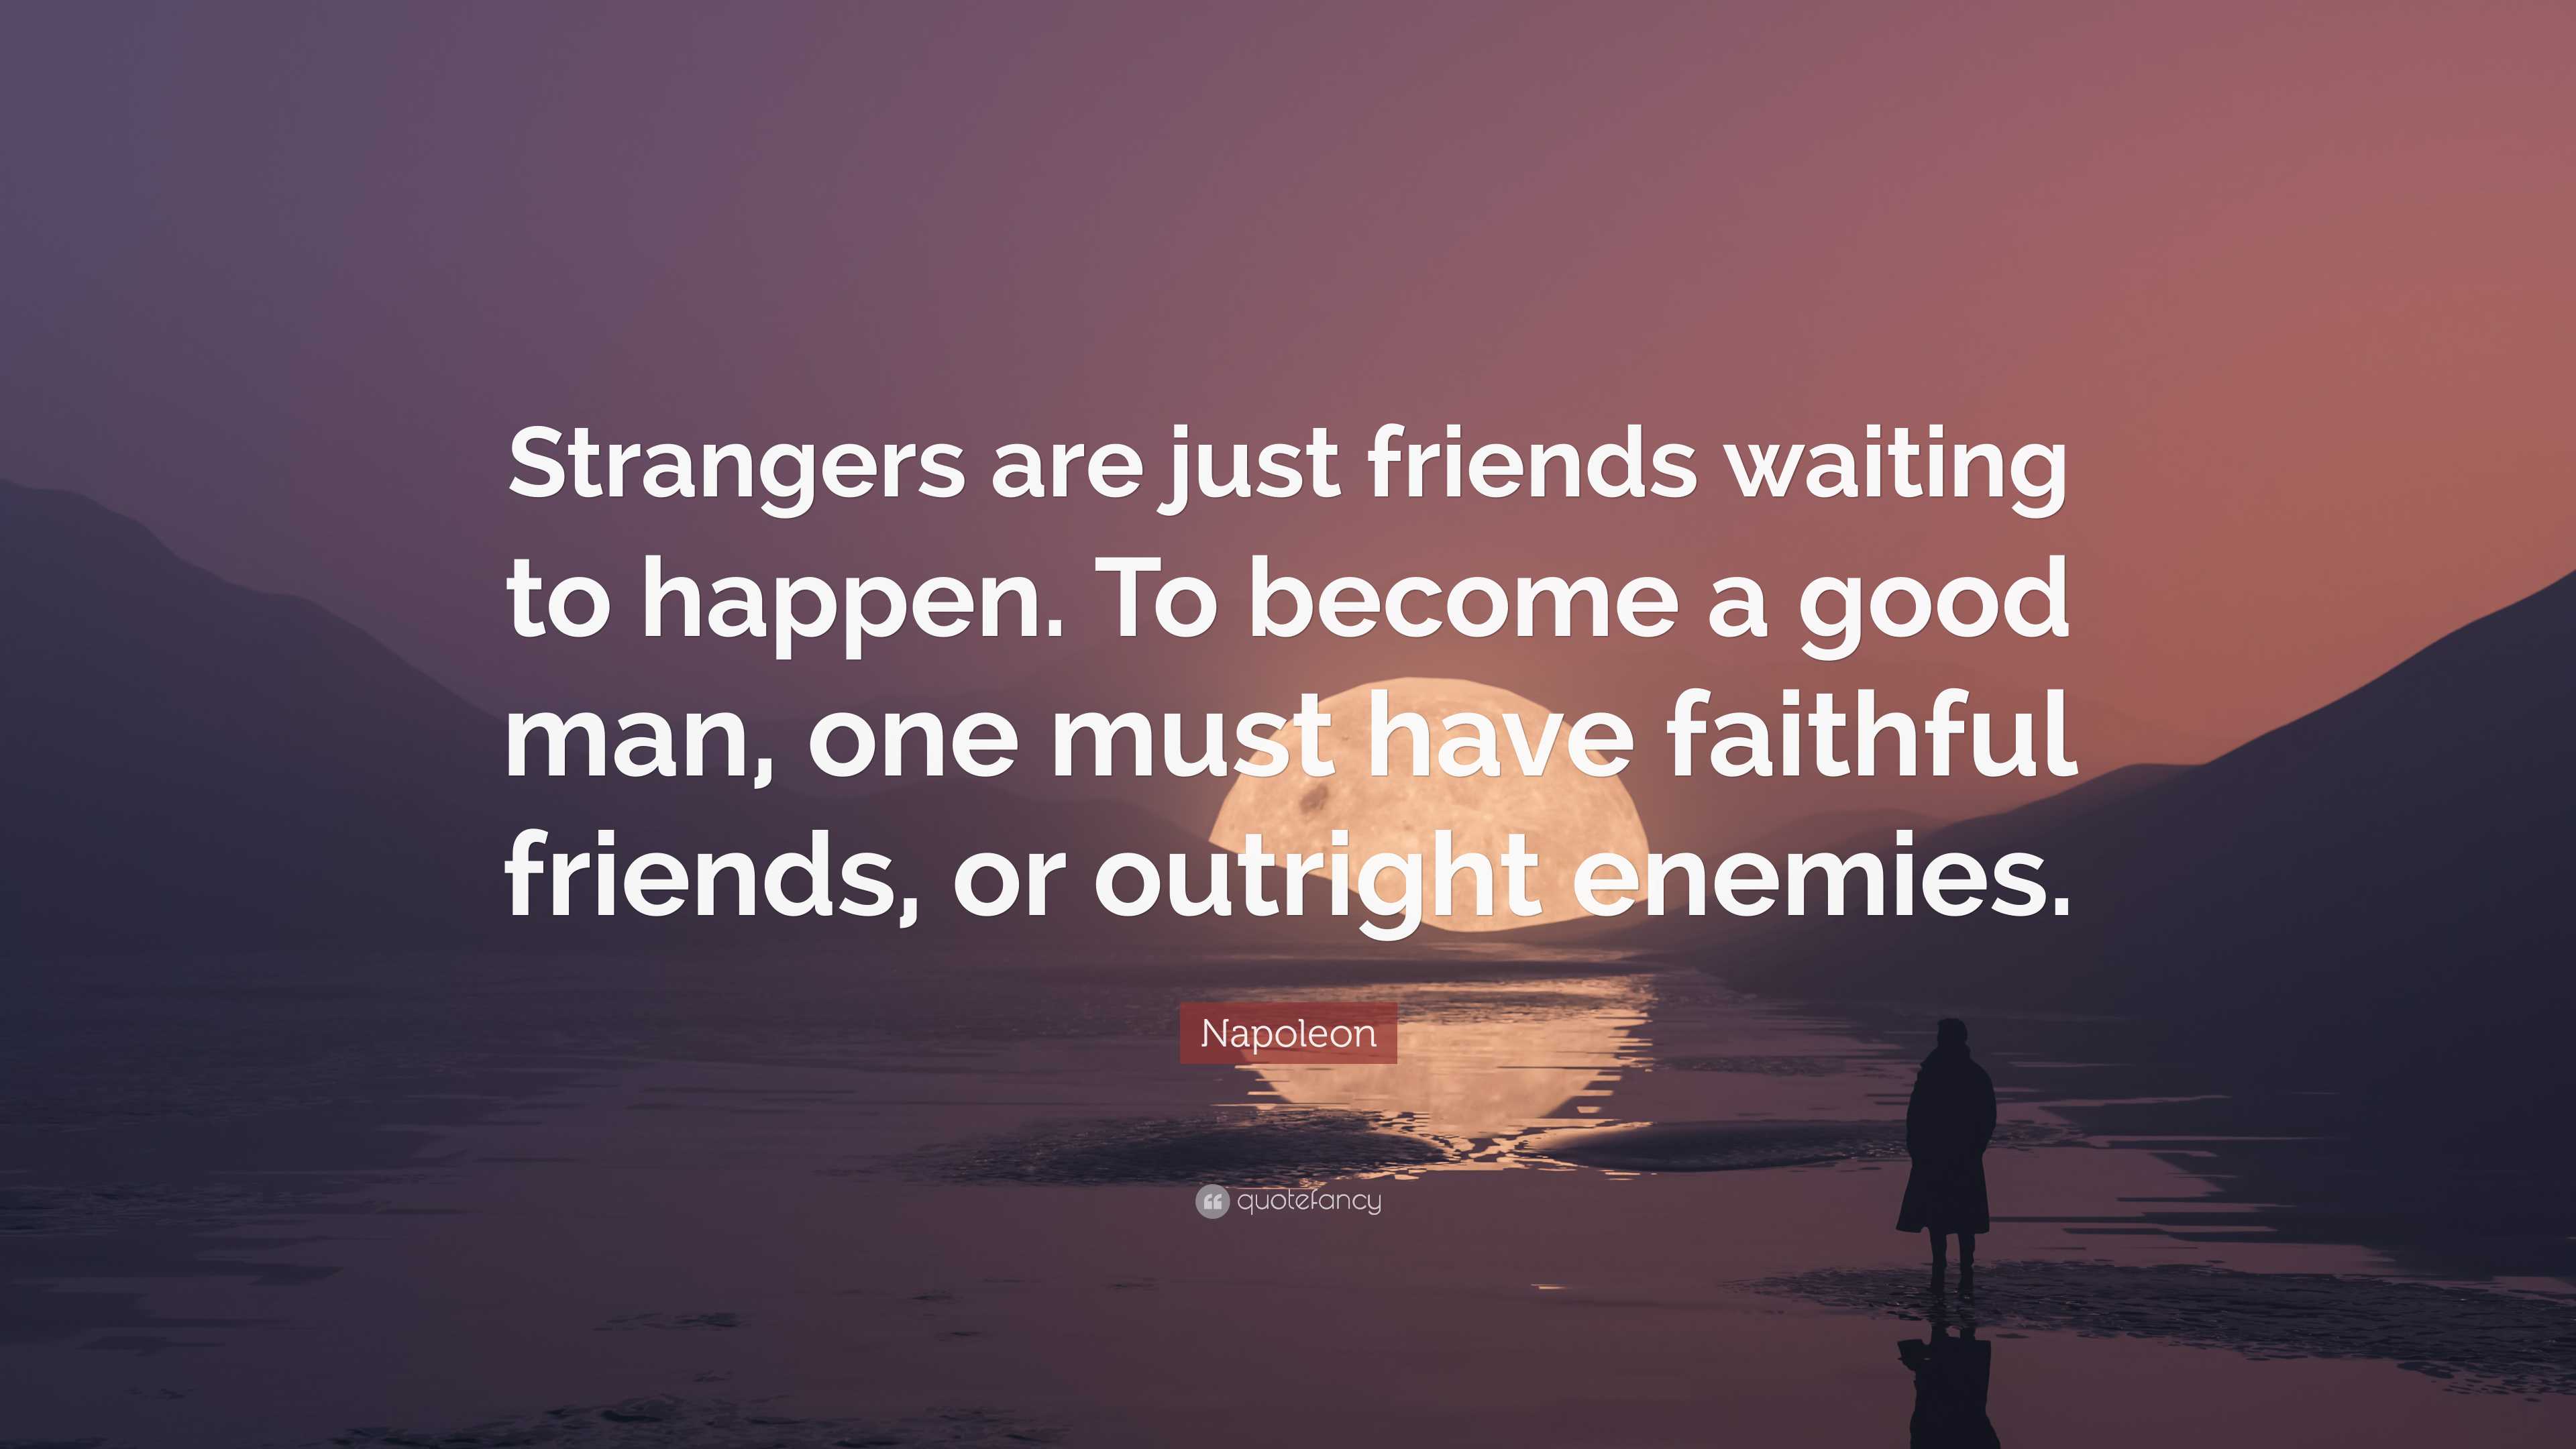 Napoleon Quote: “Strangers are just friends waiting to happen. To become a  good man, one must